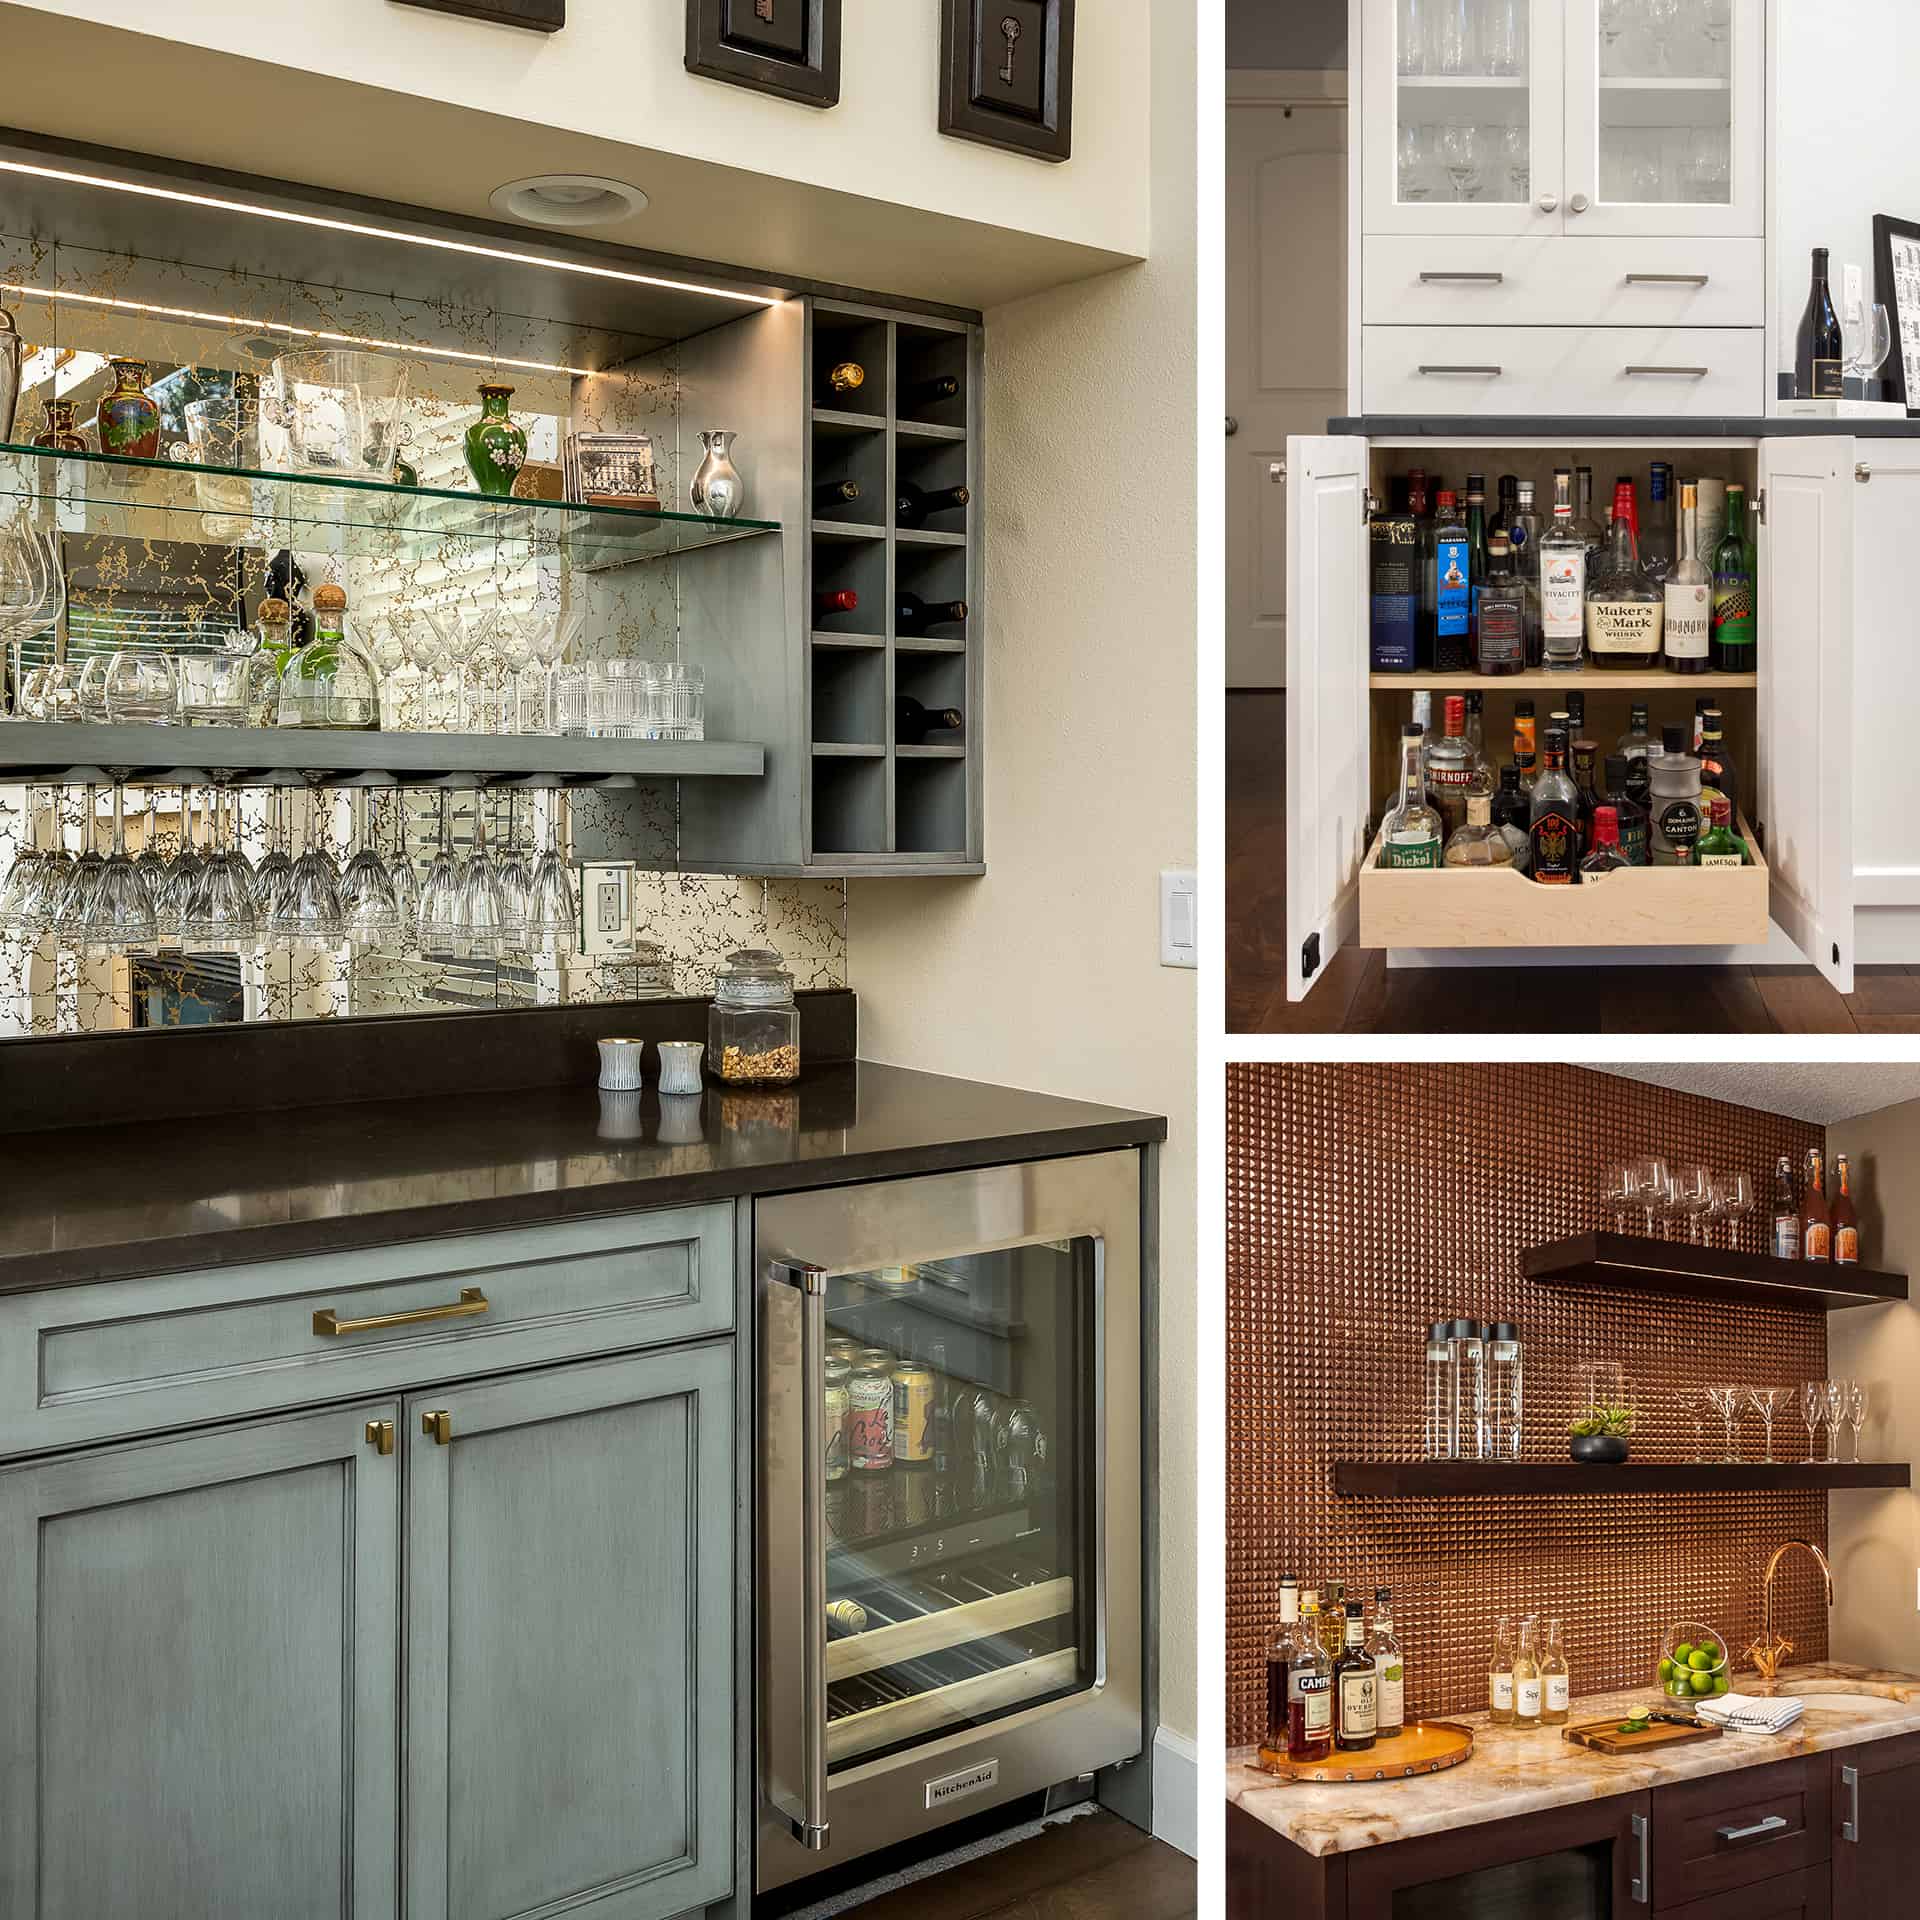 Beverage station, coffee bar, drink area…whatever you call it, it